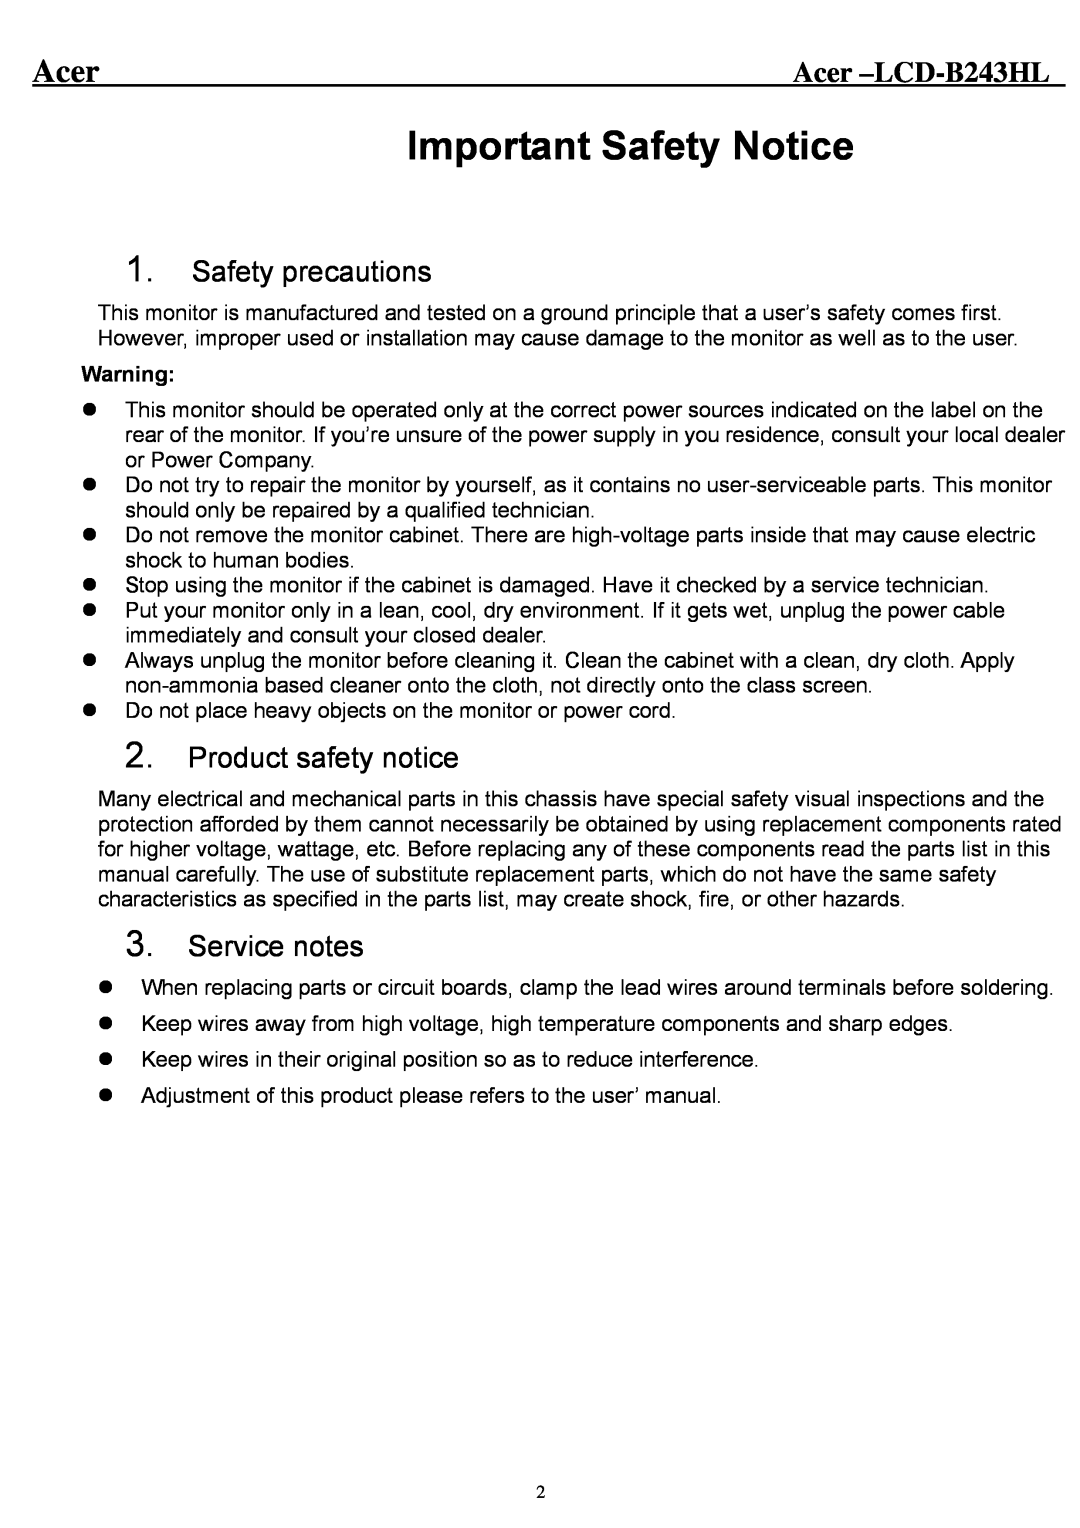 Acer Important Safety Notice, Acer -LCD-B243HL, Safety precautions, Product safety notice, Service notes 